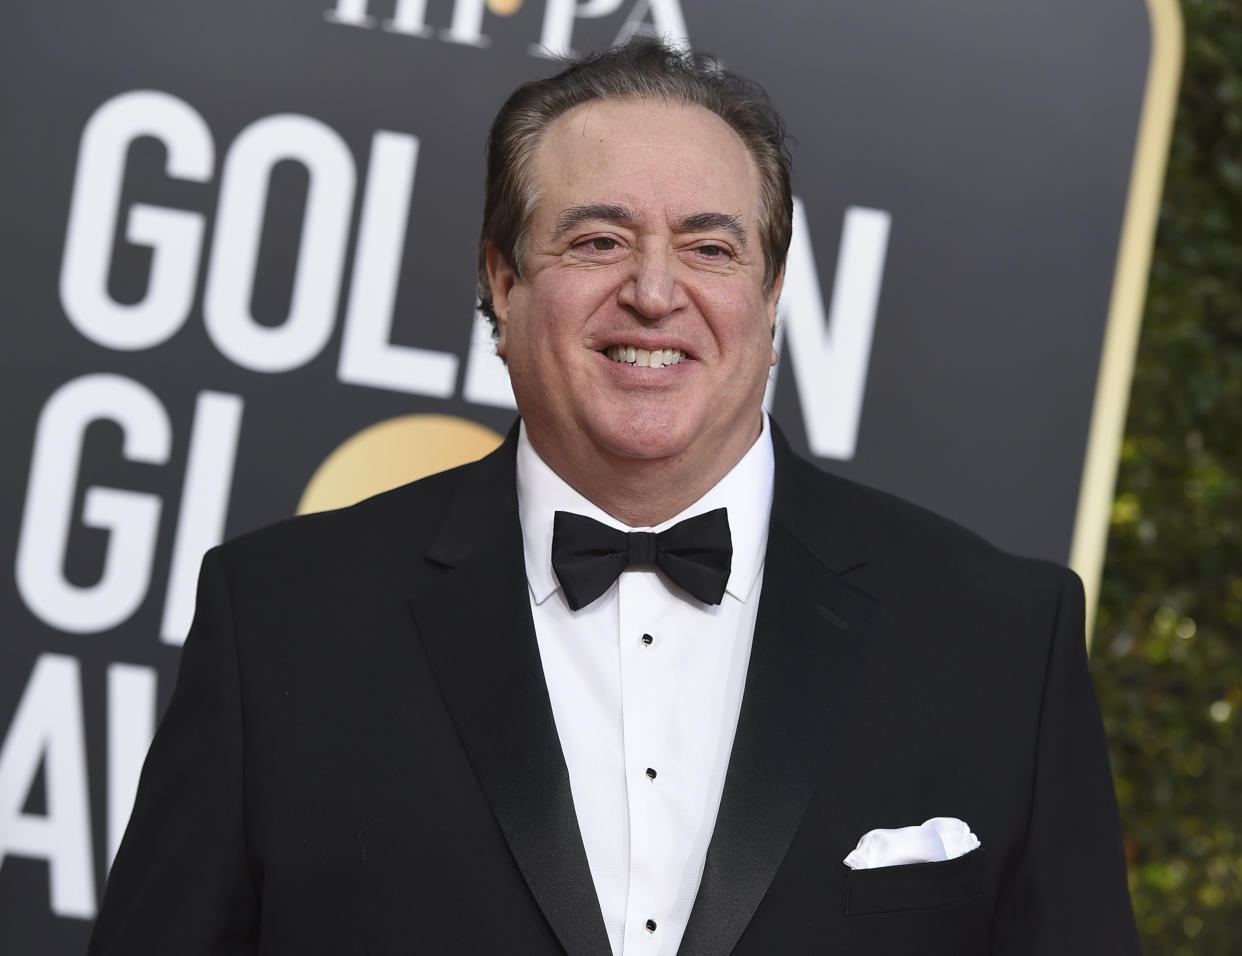 Nick Vallelonga arrives at the 76th annual Golden Globe Awards at the Beverly Hilton Hotel on Sunday, Jan. 6, 2019, in Beverly Hills, Calif. (Photo: Jordan Strauss/Invision/AP)